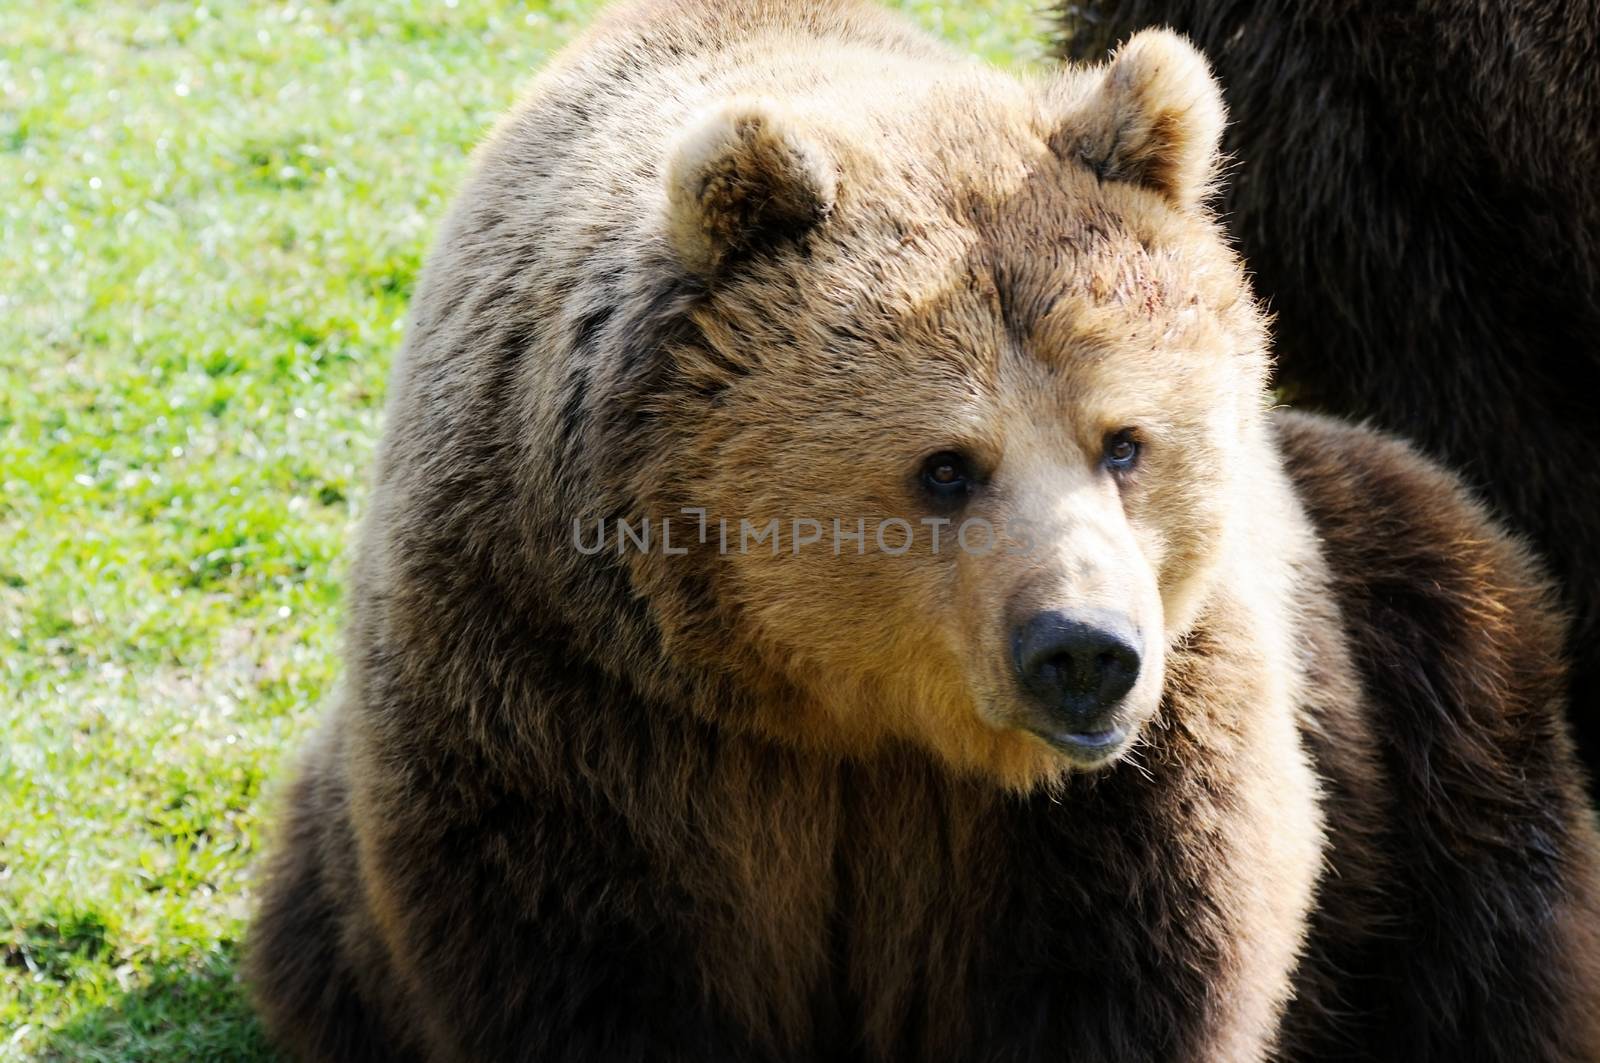 Brown bear by kmwphotography